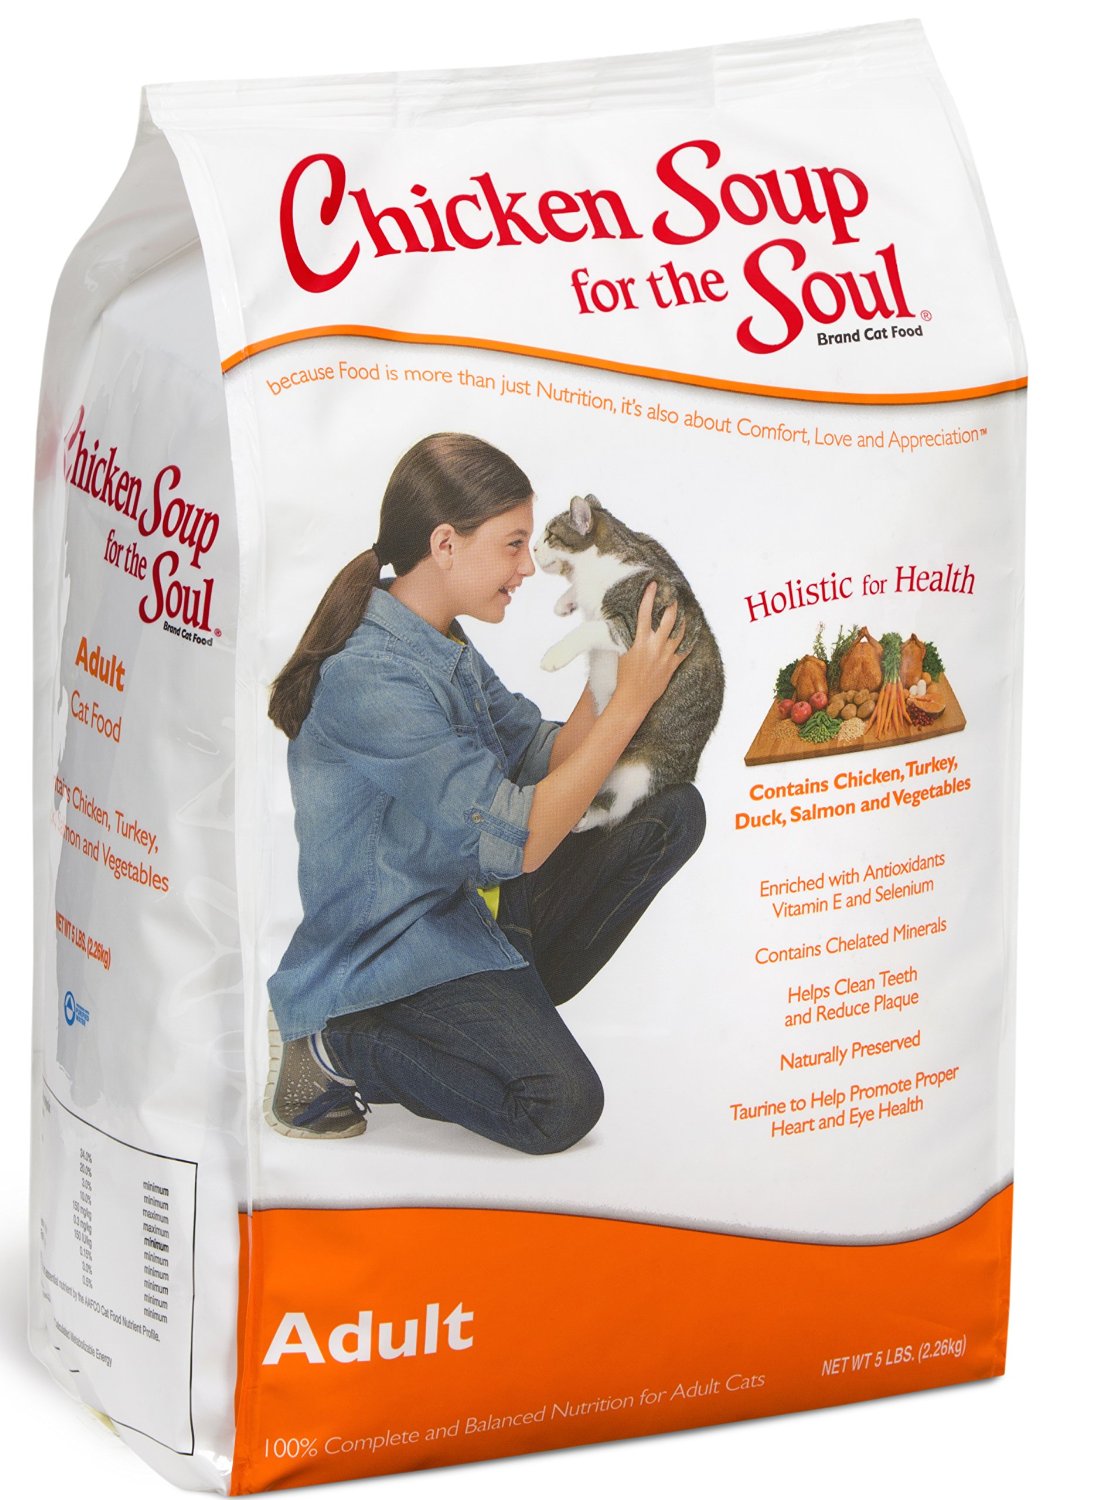 Chicken Soup for The Soul Cat Food Review - Is It Good For Your Cat?1097 x 1500